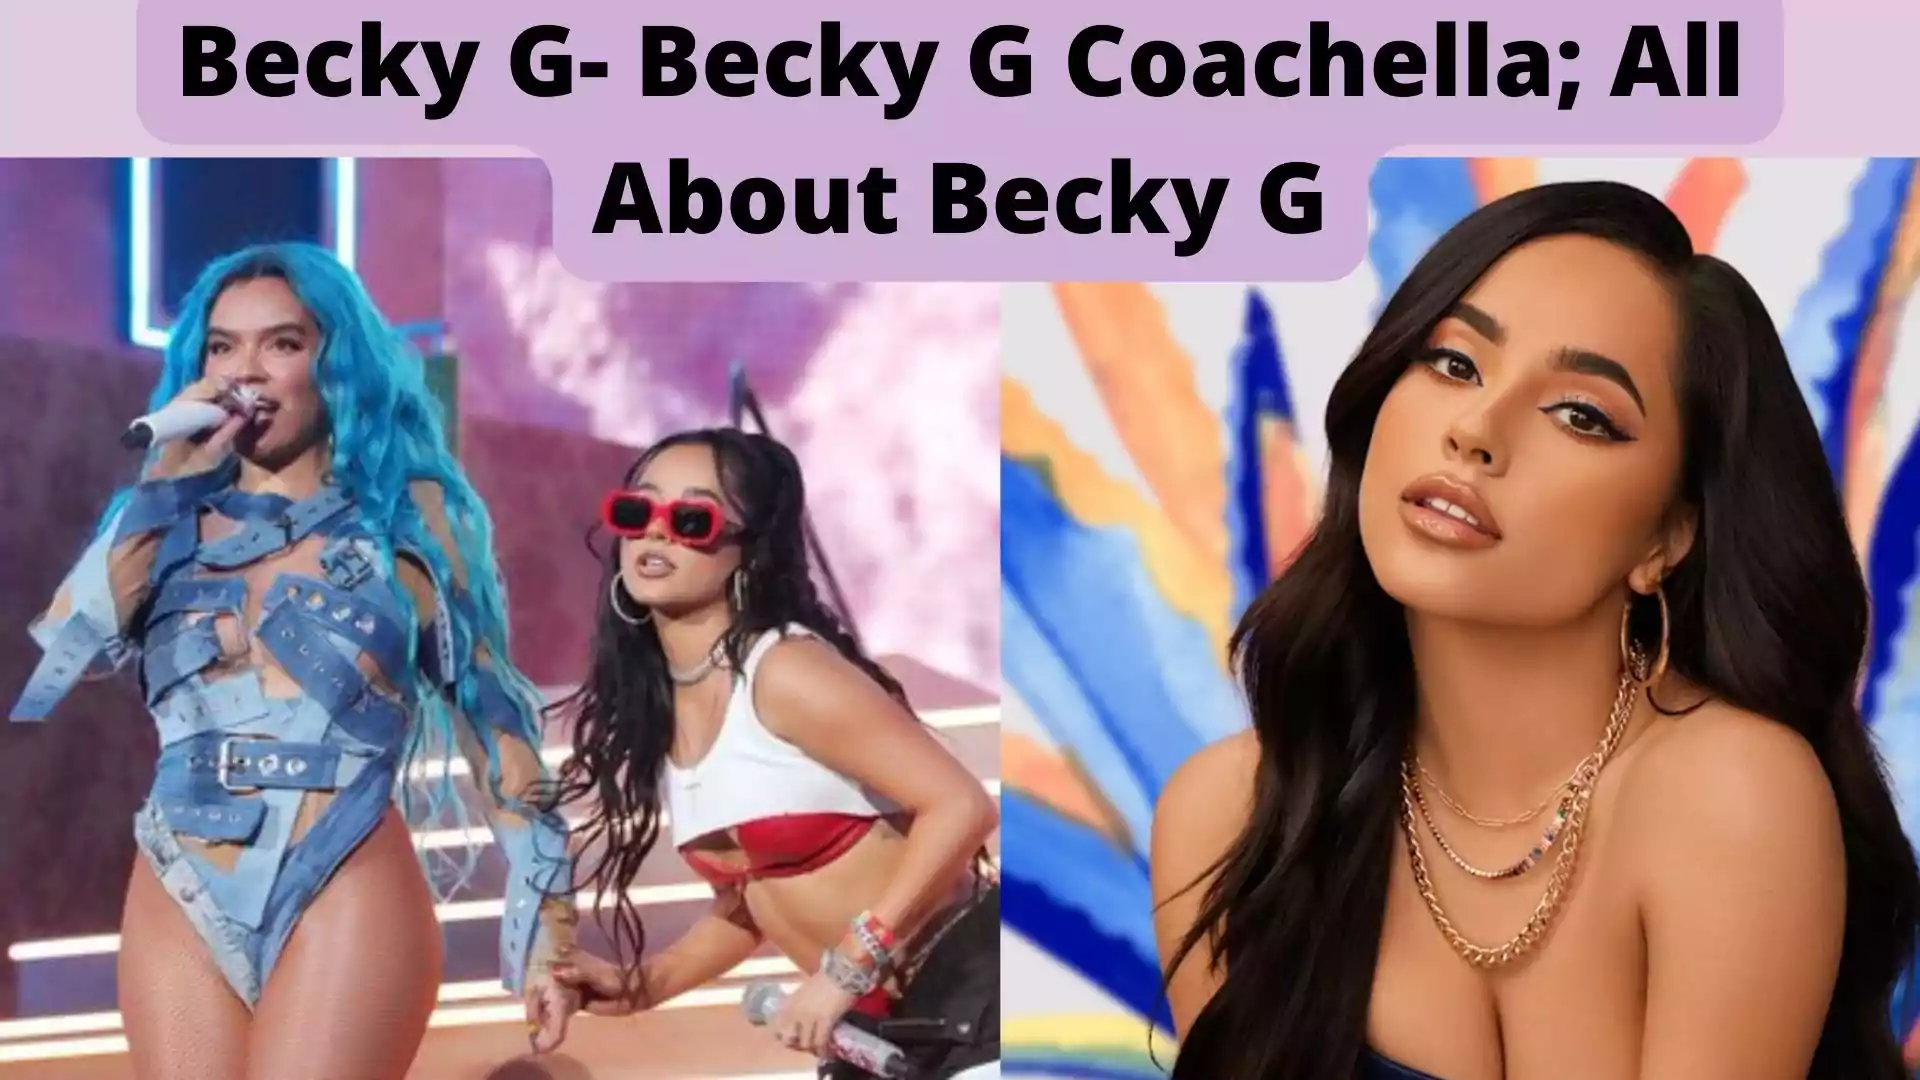 Becky G- Becky G Coachella; All About Becky G wallpaper and images